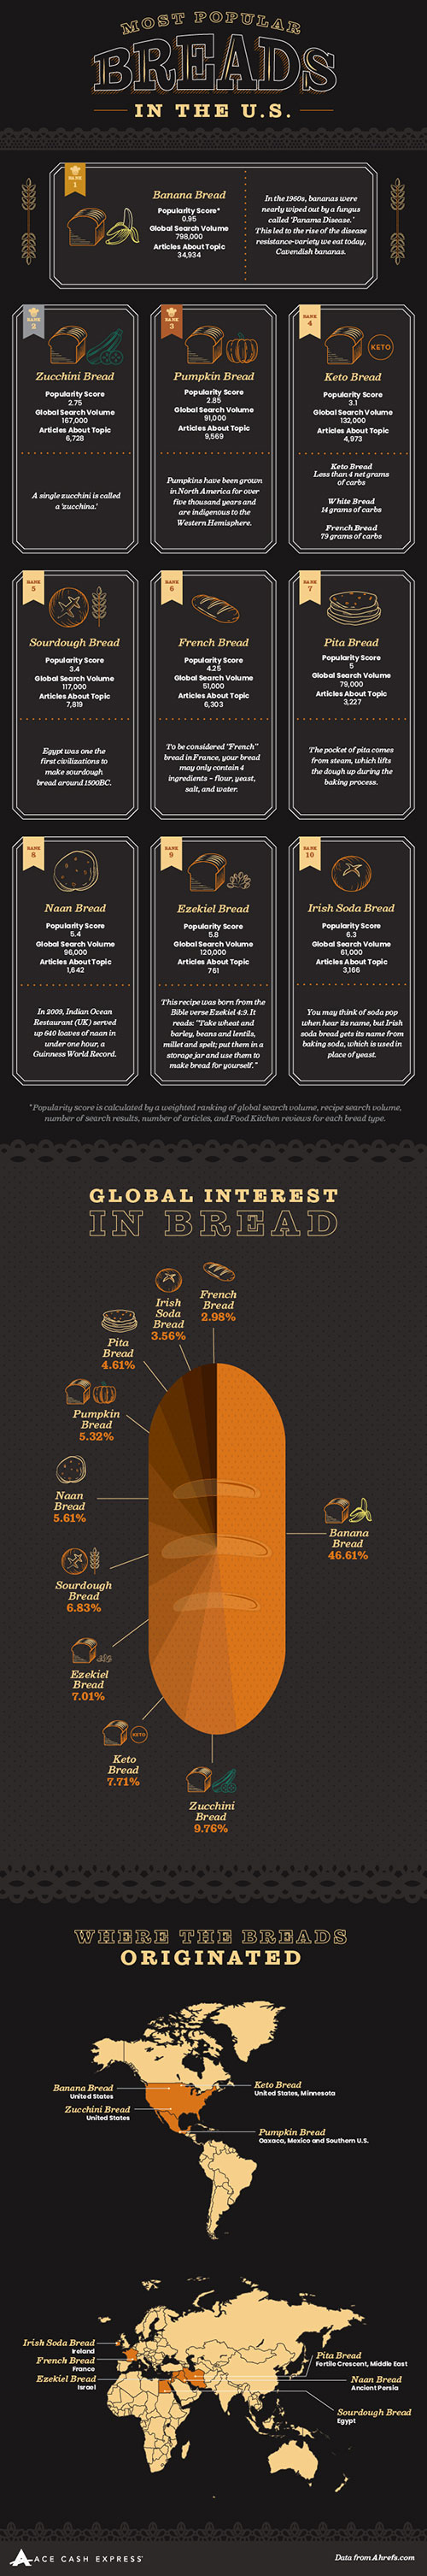 The Most Popular Breads in the U.S. Infographic